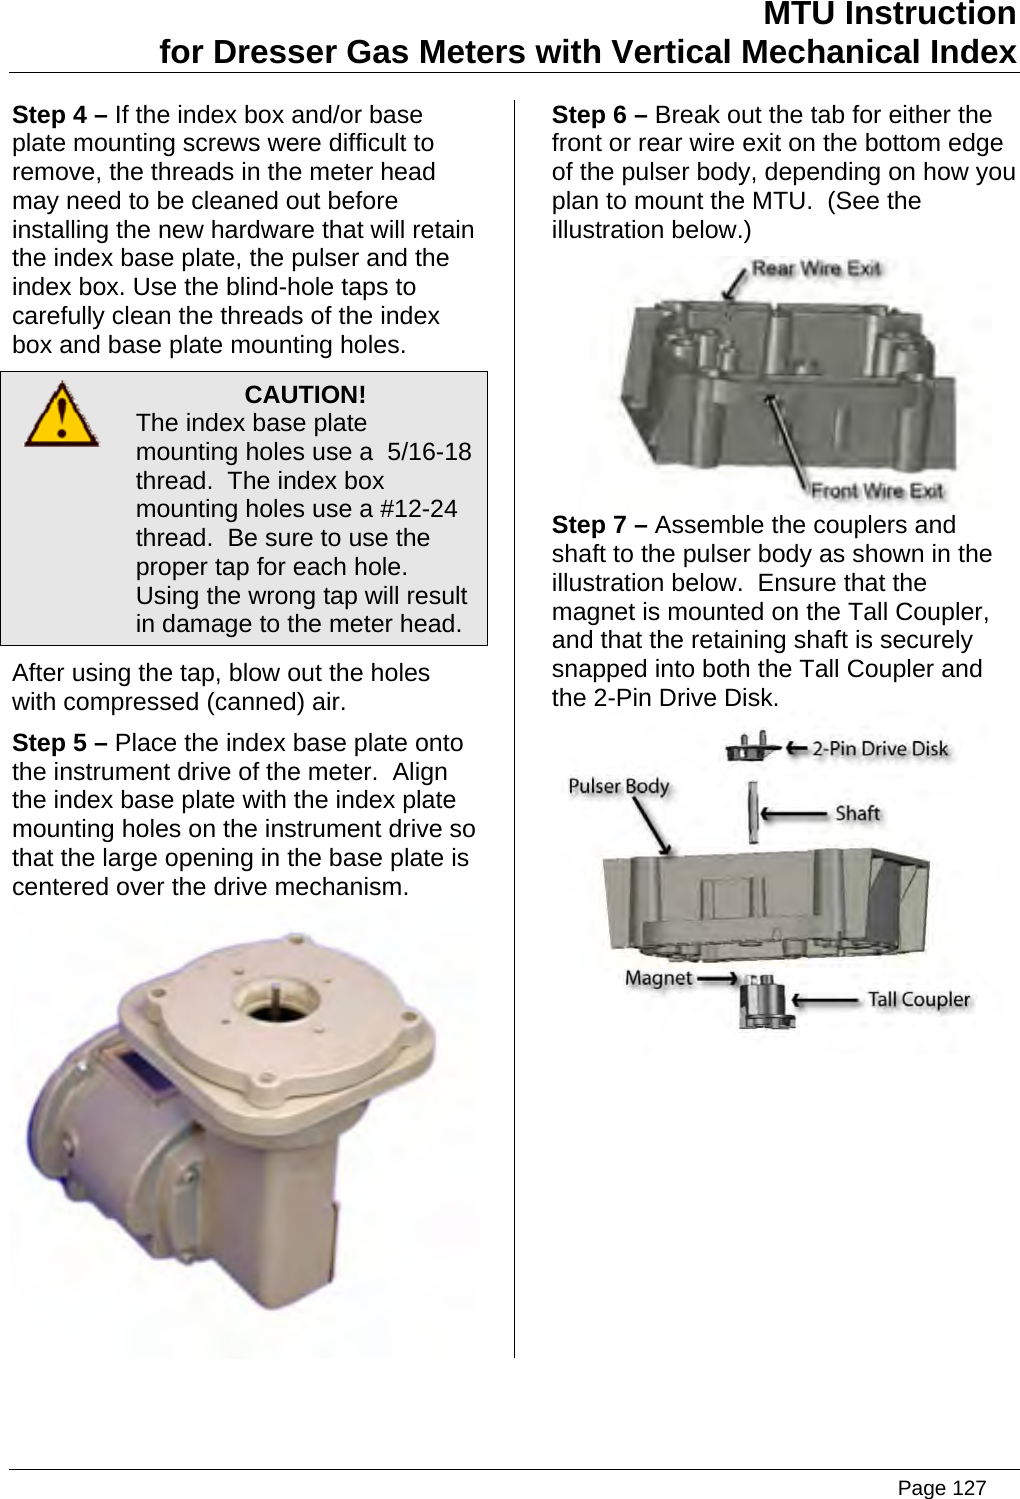 MTU Instruction for Dresser Gas Meters with Vertical Mechanical Index Step 4 – If the index box and/or base plate mounting screws were difficult to remove, the threads in the meter head may need to be cleaned out before installing the new hardware that will retain the index base plate, the pulser and the index box. Use the blind-hole taps to carefully clean the threads of the index box and base plate mounting holes.  CAUTION! The index base plate mounting holes use a  5/16-18 thread.  The index box mounting holes use a #12-24 thread.  Be sure to use the proper tap for each hole.  Using the wrong tap will result in damage to the meter head. After using the tap, blow out the holes with compressed (canned) air. Step 5 – Place the index base plate onto the instrument drive of the meter.  Align the index base plate with the index plate mounting holes on the instrument drive so that the large opening in the base plate is centered over the drive mechanism.  Step 6 – Break out the tab for either the front or rear wire exit on the bottom edge of the pulser body, depending on how you plan to mount the MTU.  (See the illustration below.)  Step 7 – Assemble the couplers and shaft to the pulser body as shown in the illustration below.  Ensure that the magnet is mounted on the Tall Coupler, and that the retaining shaft is securely snapped into both the Tall Coupler and the 2-Pin Drive Disk.    Page 127